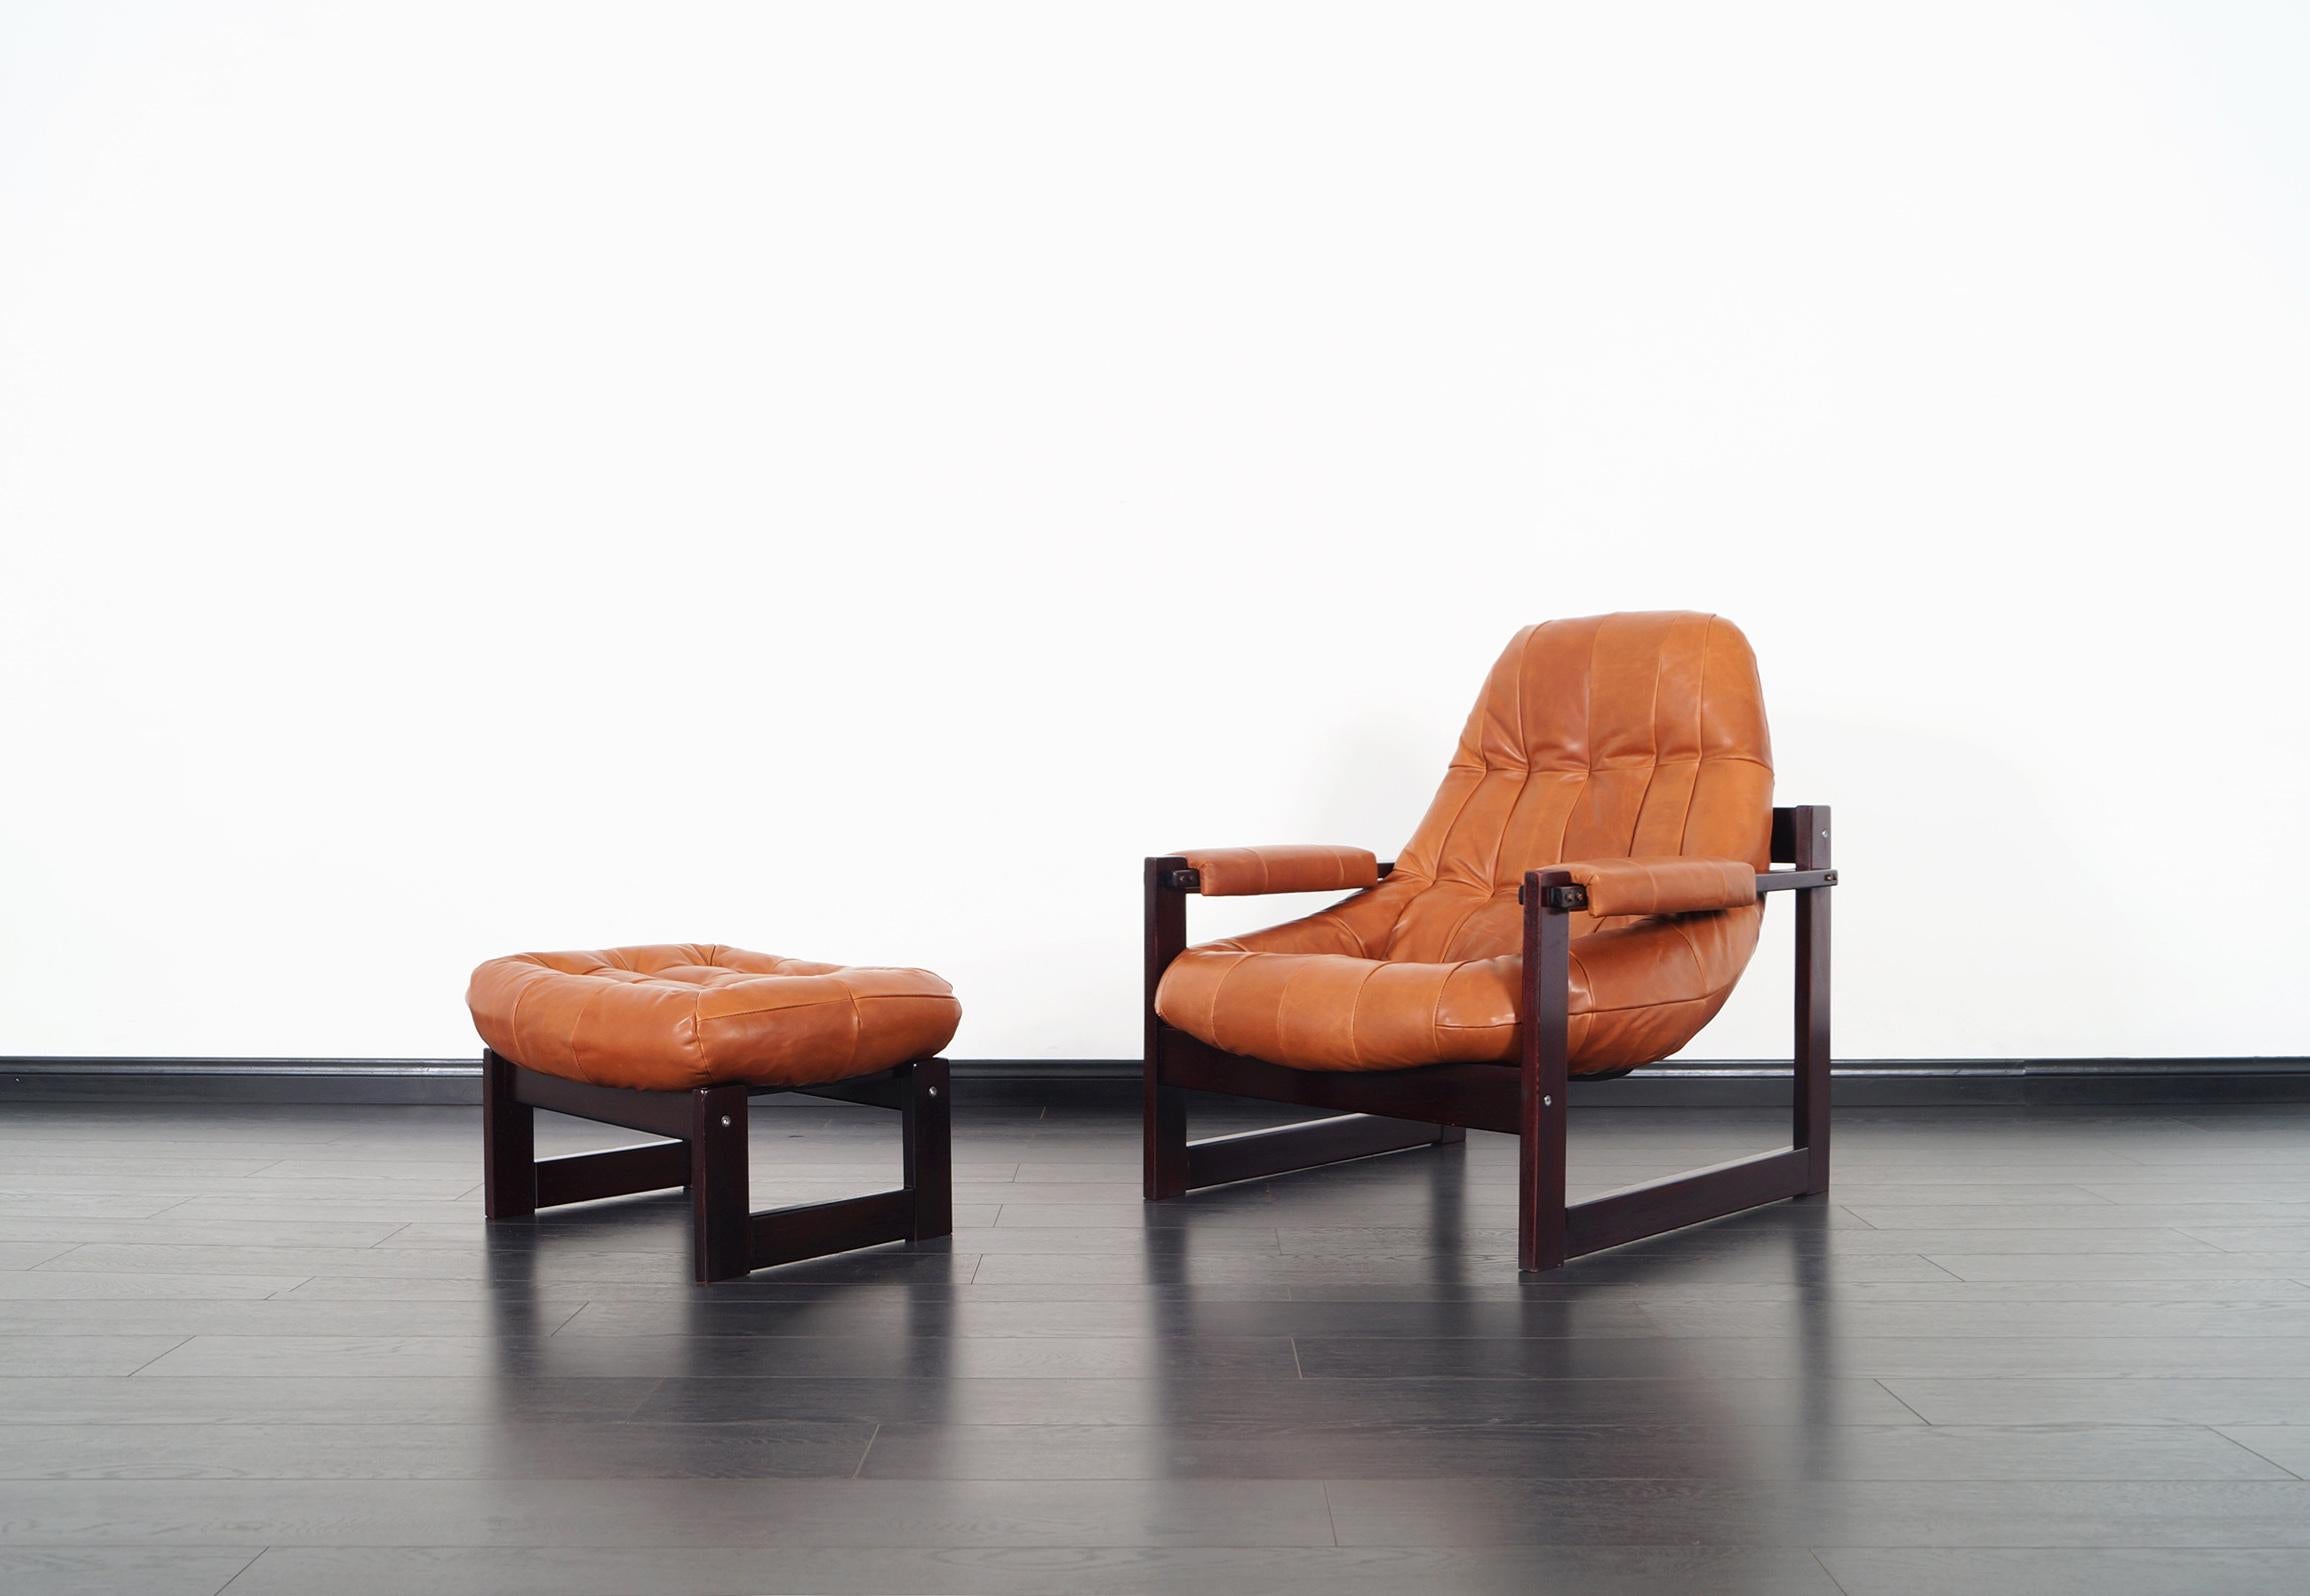 Vintage Brazilian leather lounge chair and ottoman designed by Percival Lafer. The chair and ottoman are both supported by solid Brazilian rosewood bases that shows clean lines and great craftsmanship.